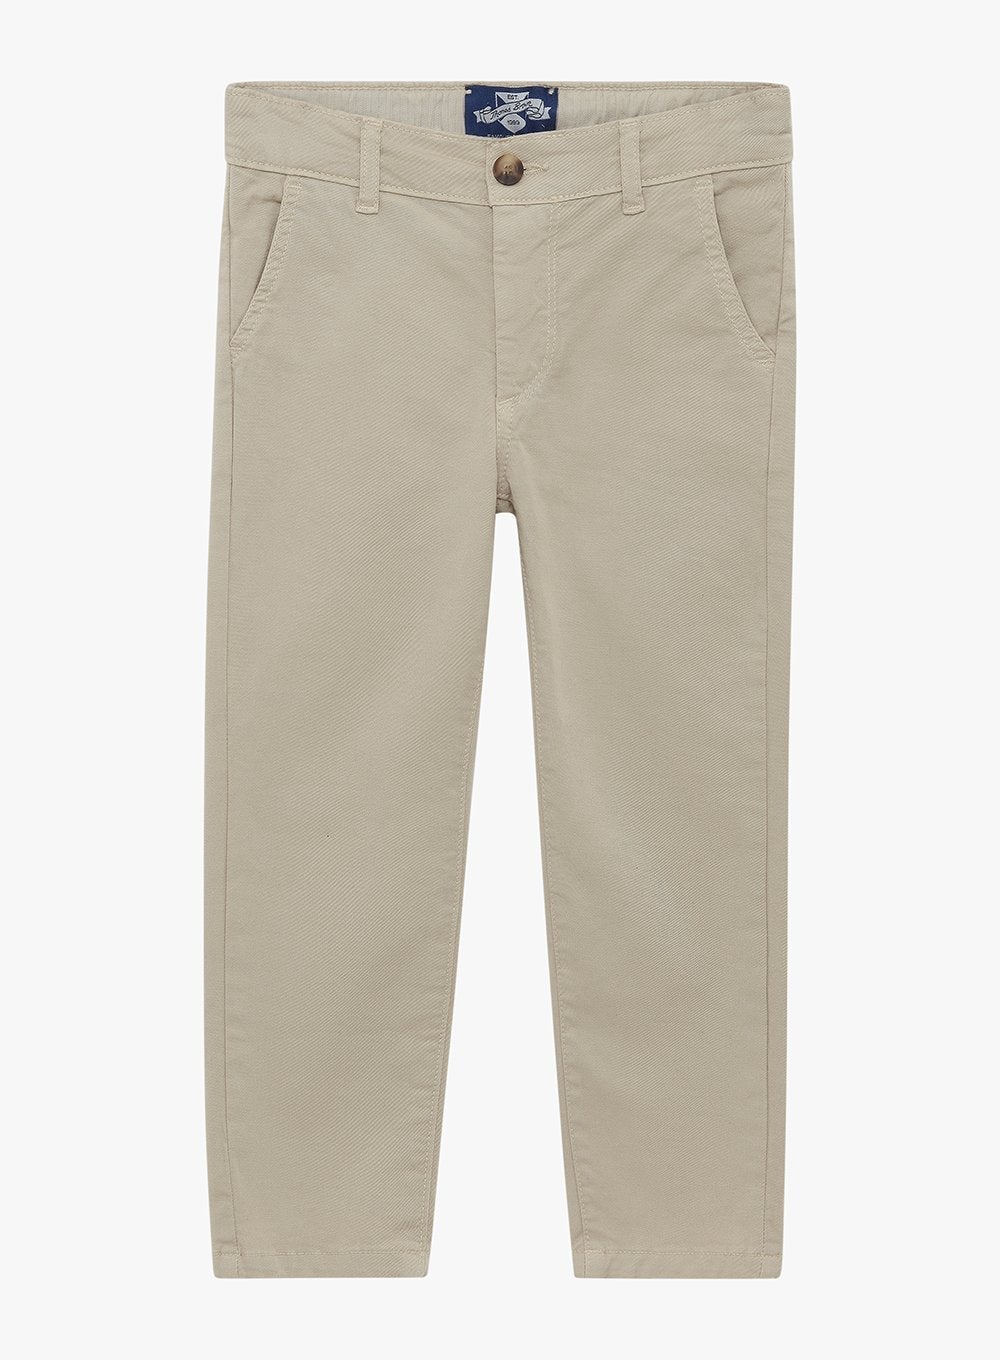 Boys Jacob Trousers in Stone